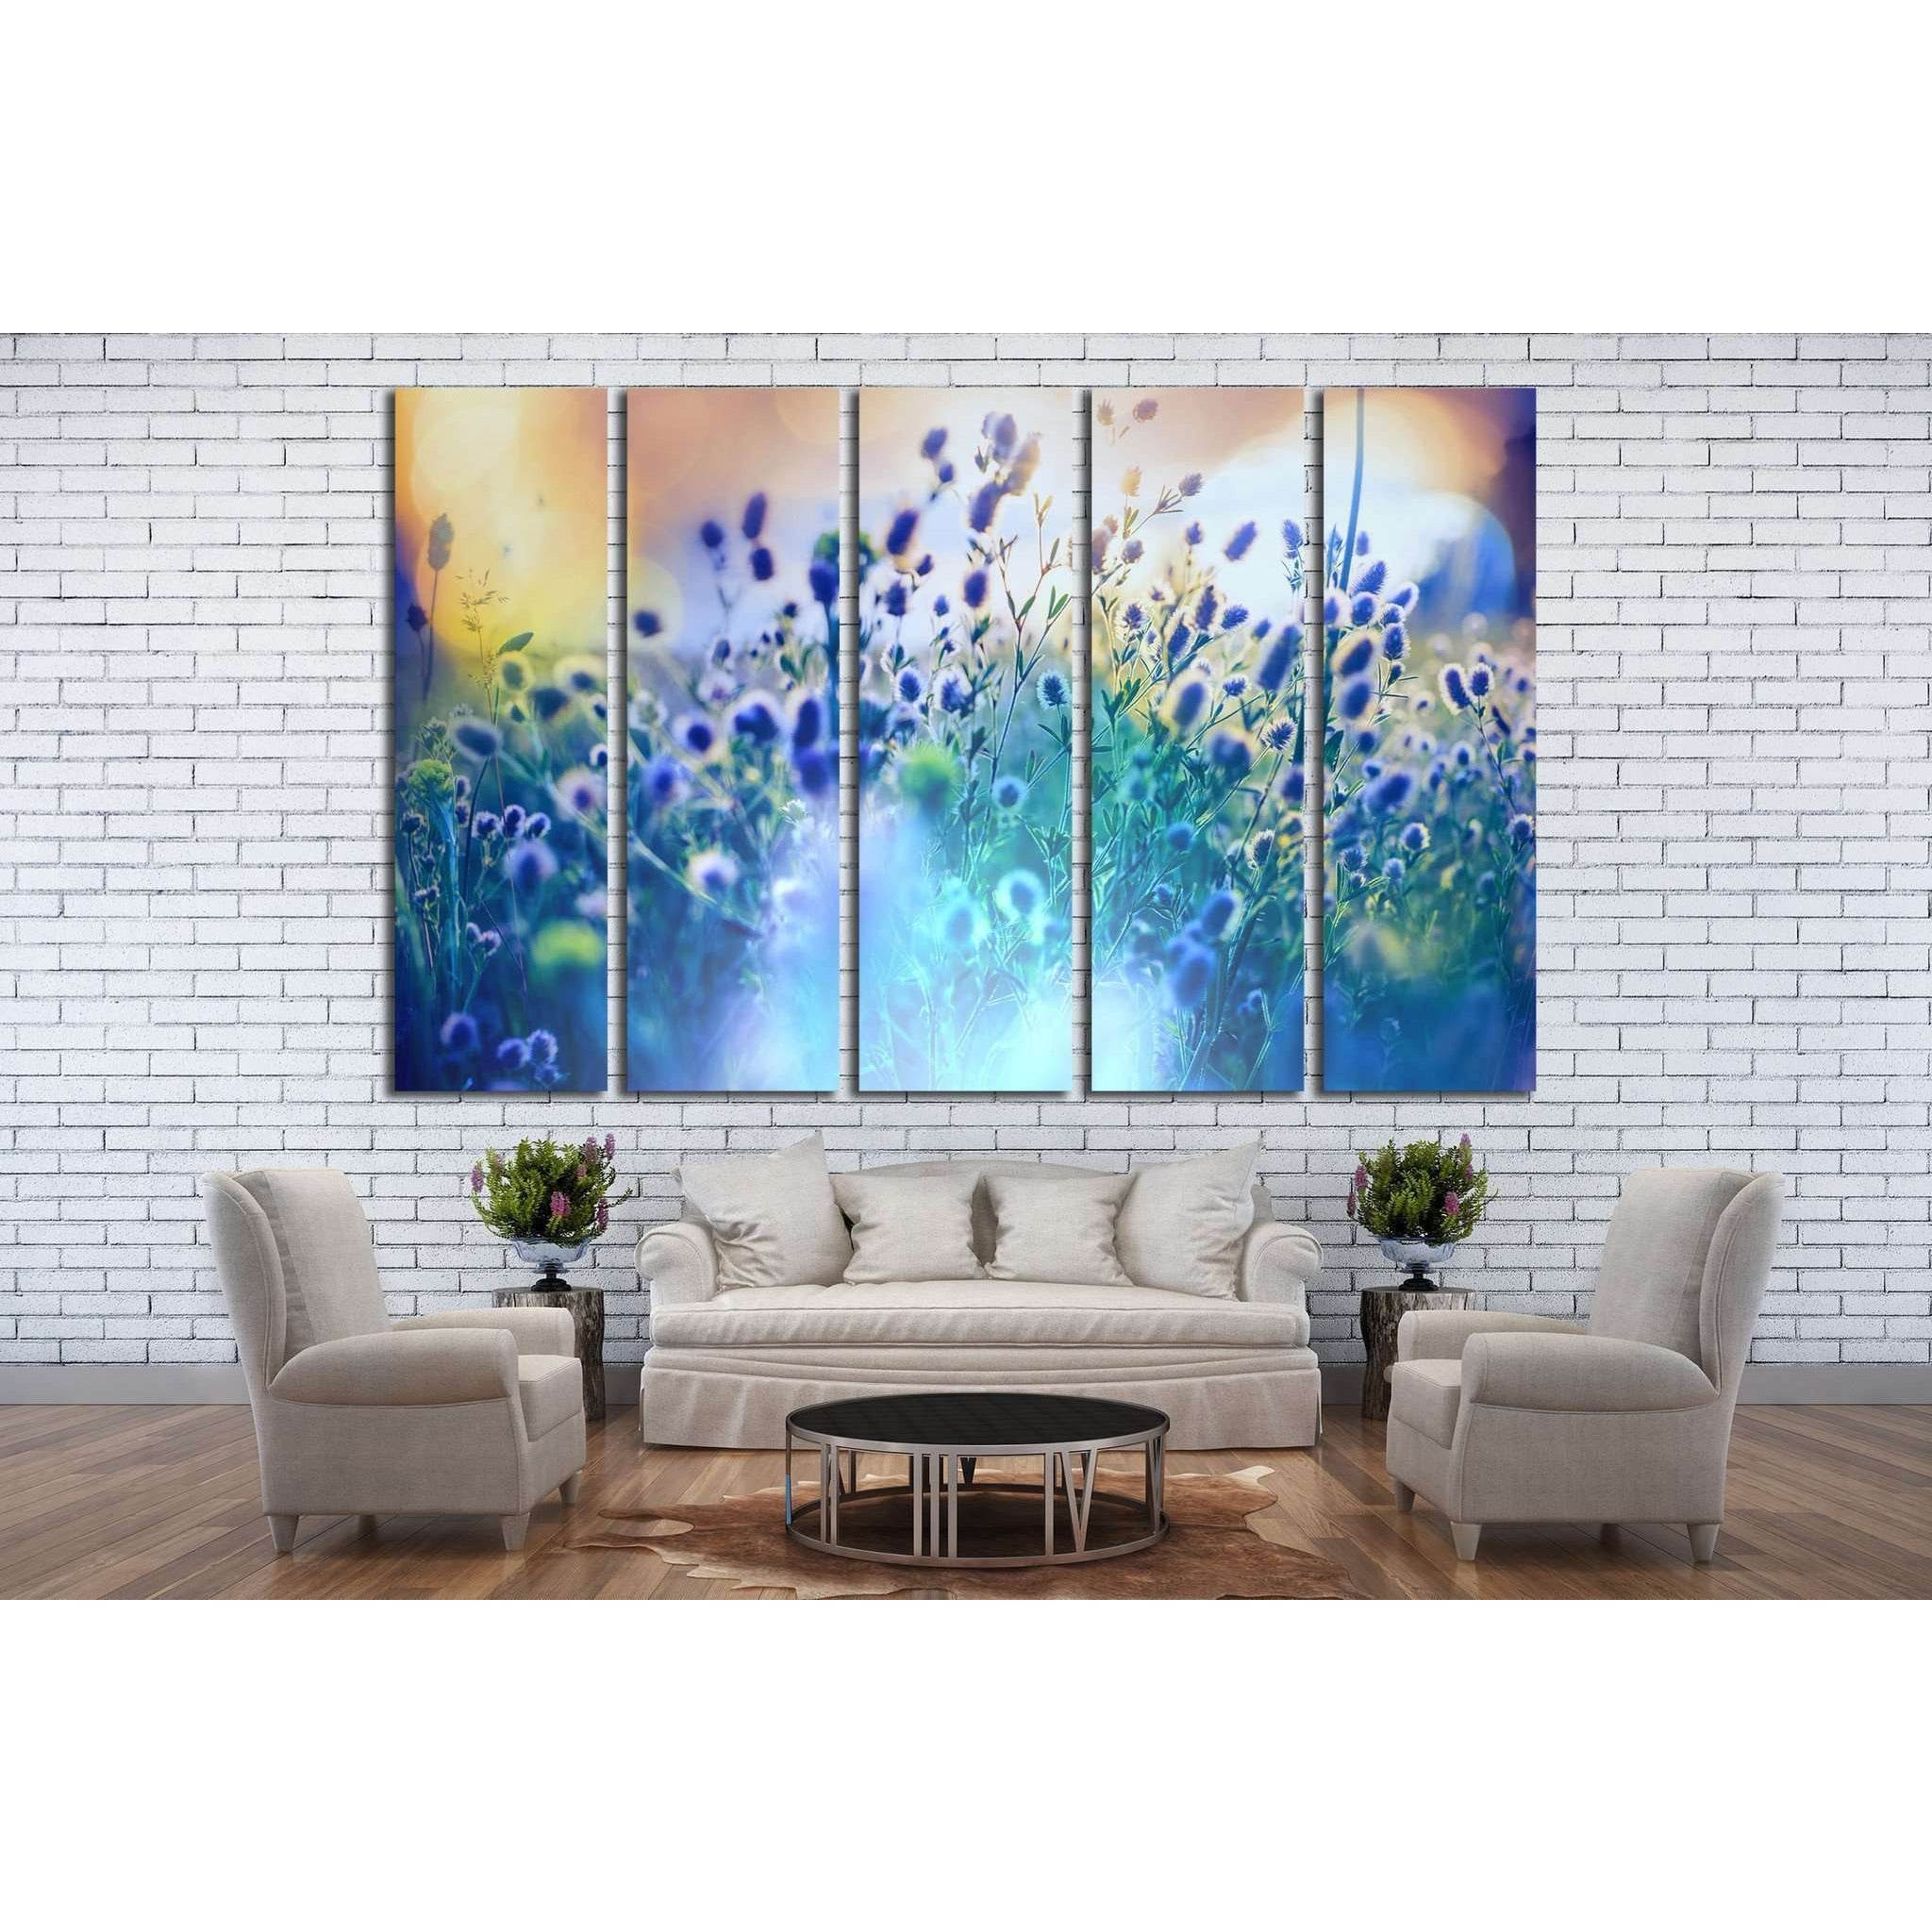 Summer flowers meadow №28 Ready to Hang Canvas Print